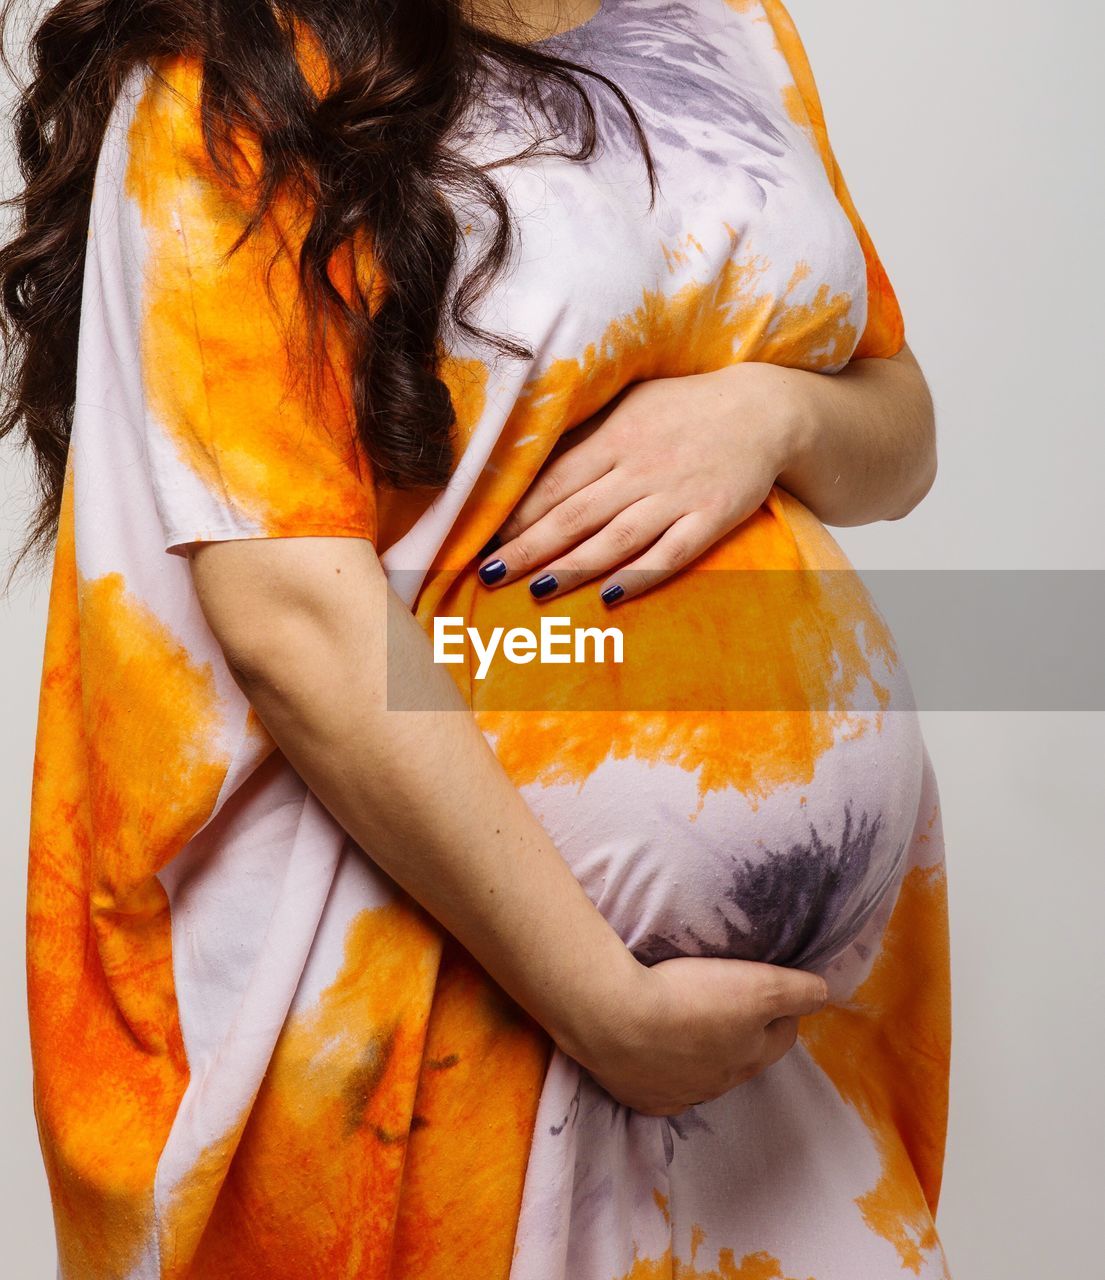 Midsection of pregnant woman holding abdomen against white background